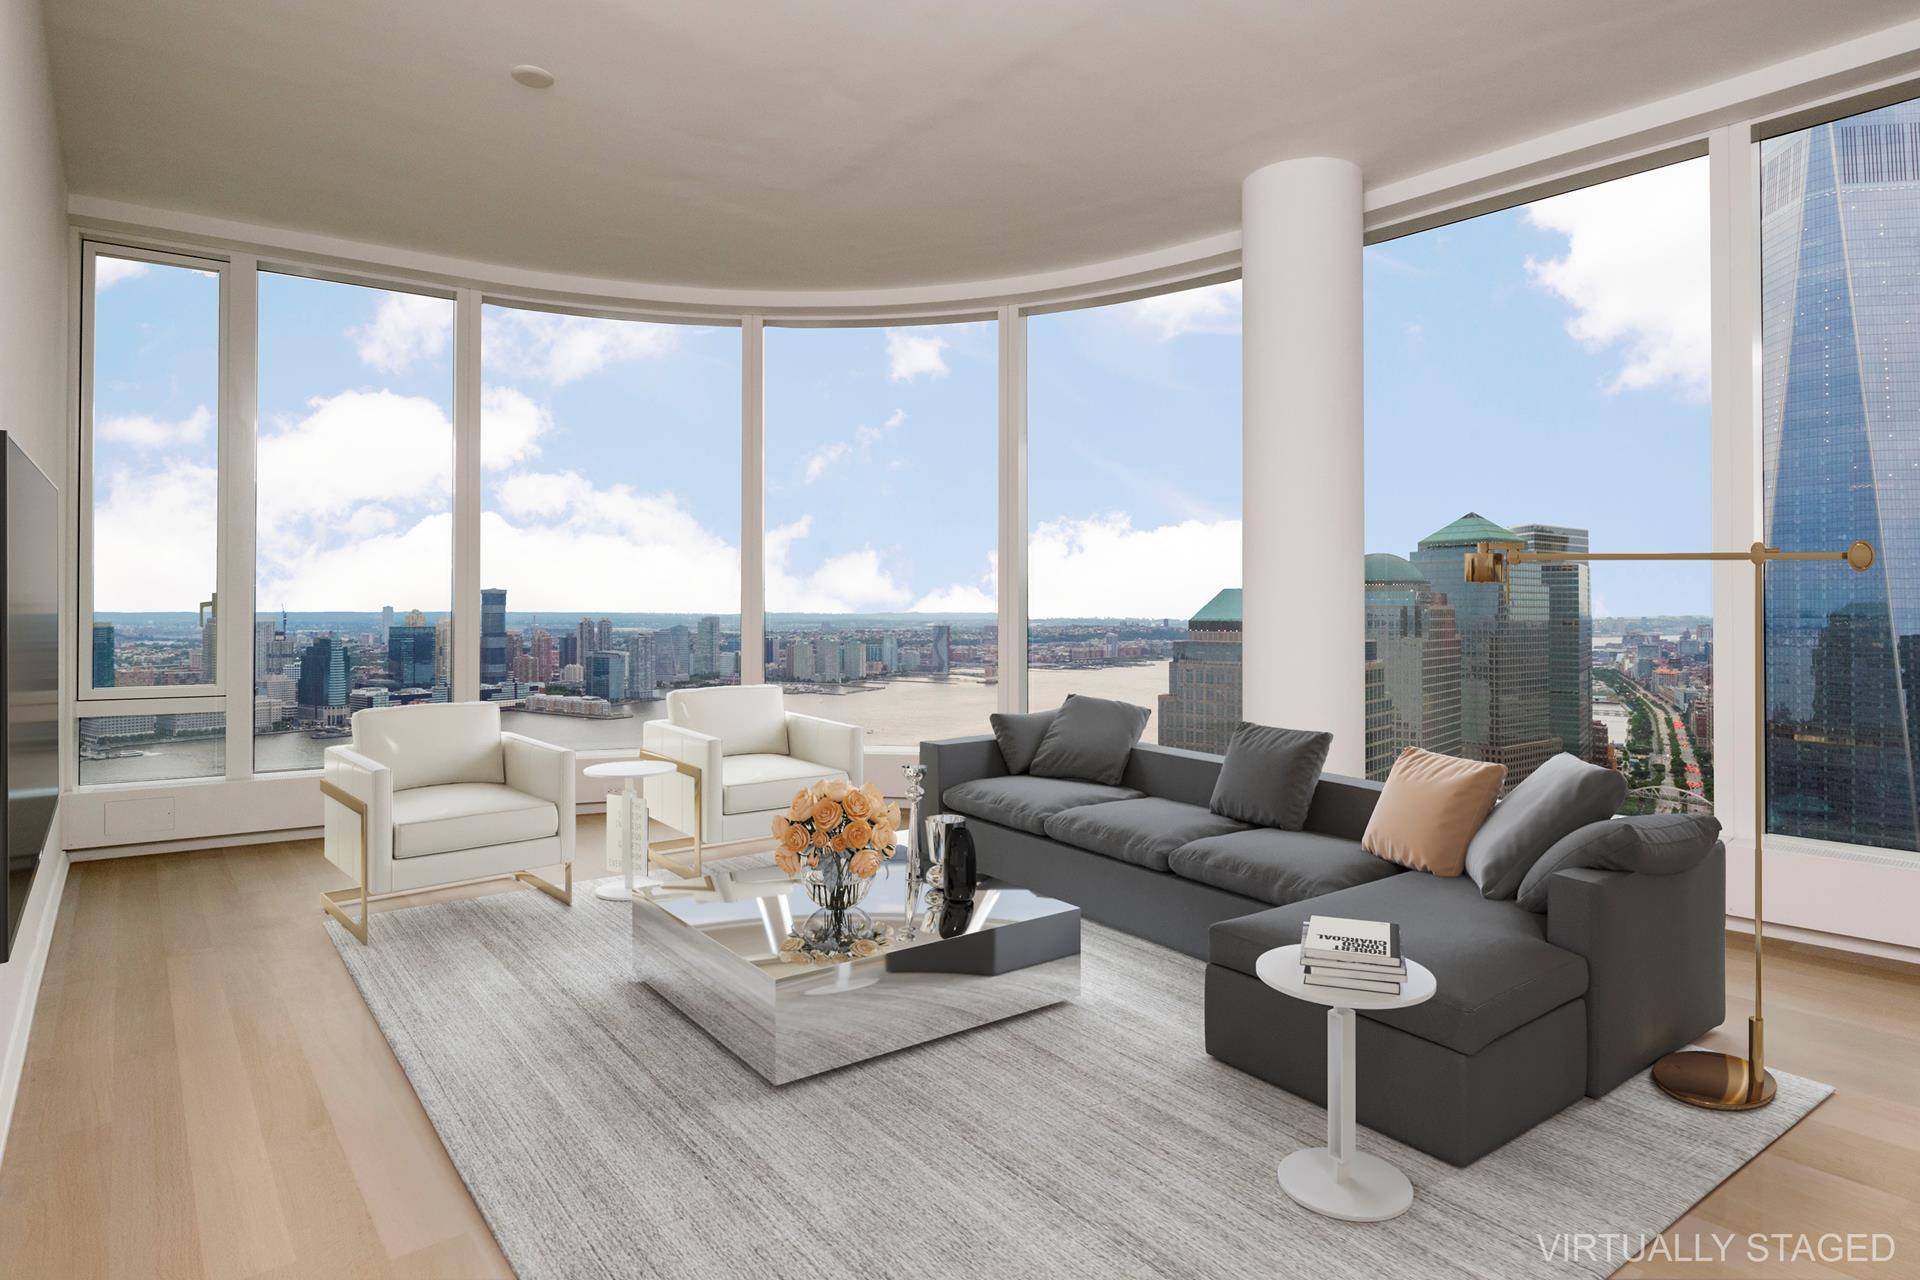 Experience an incredible inpouring of natural light and expanse of endless views stretching down to the Statue of Liberty, from the 50th floor of the striking new 50 West Street ...